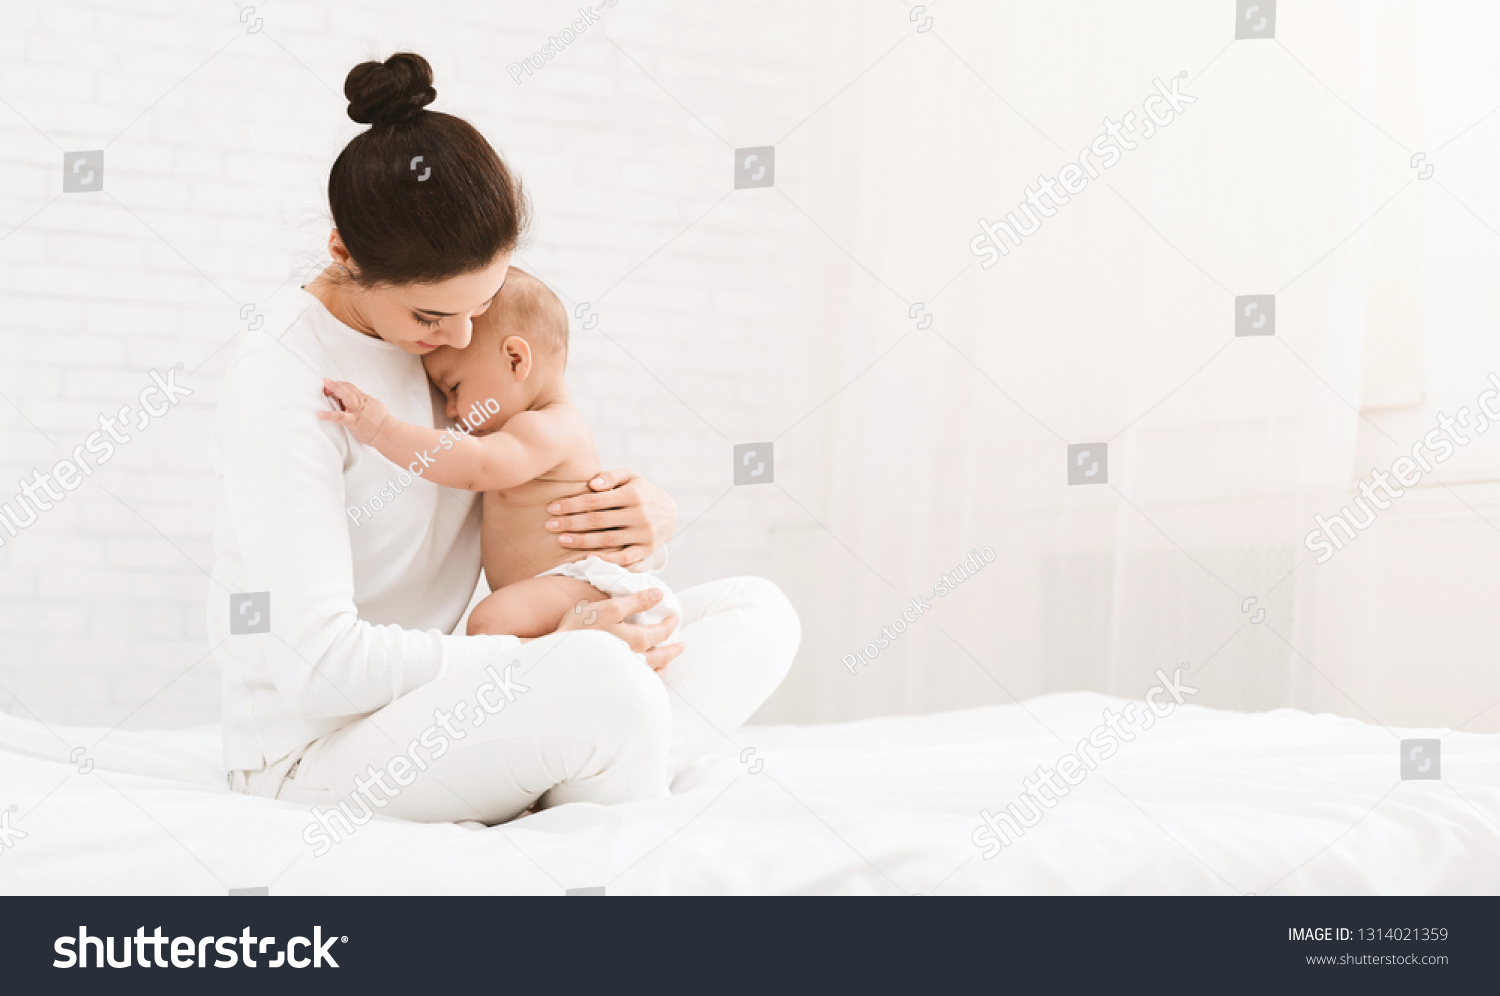 Young mother holding her newborn child, lulling baby in bed, copy space #1314021359